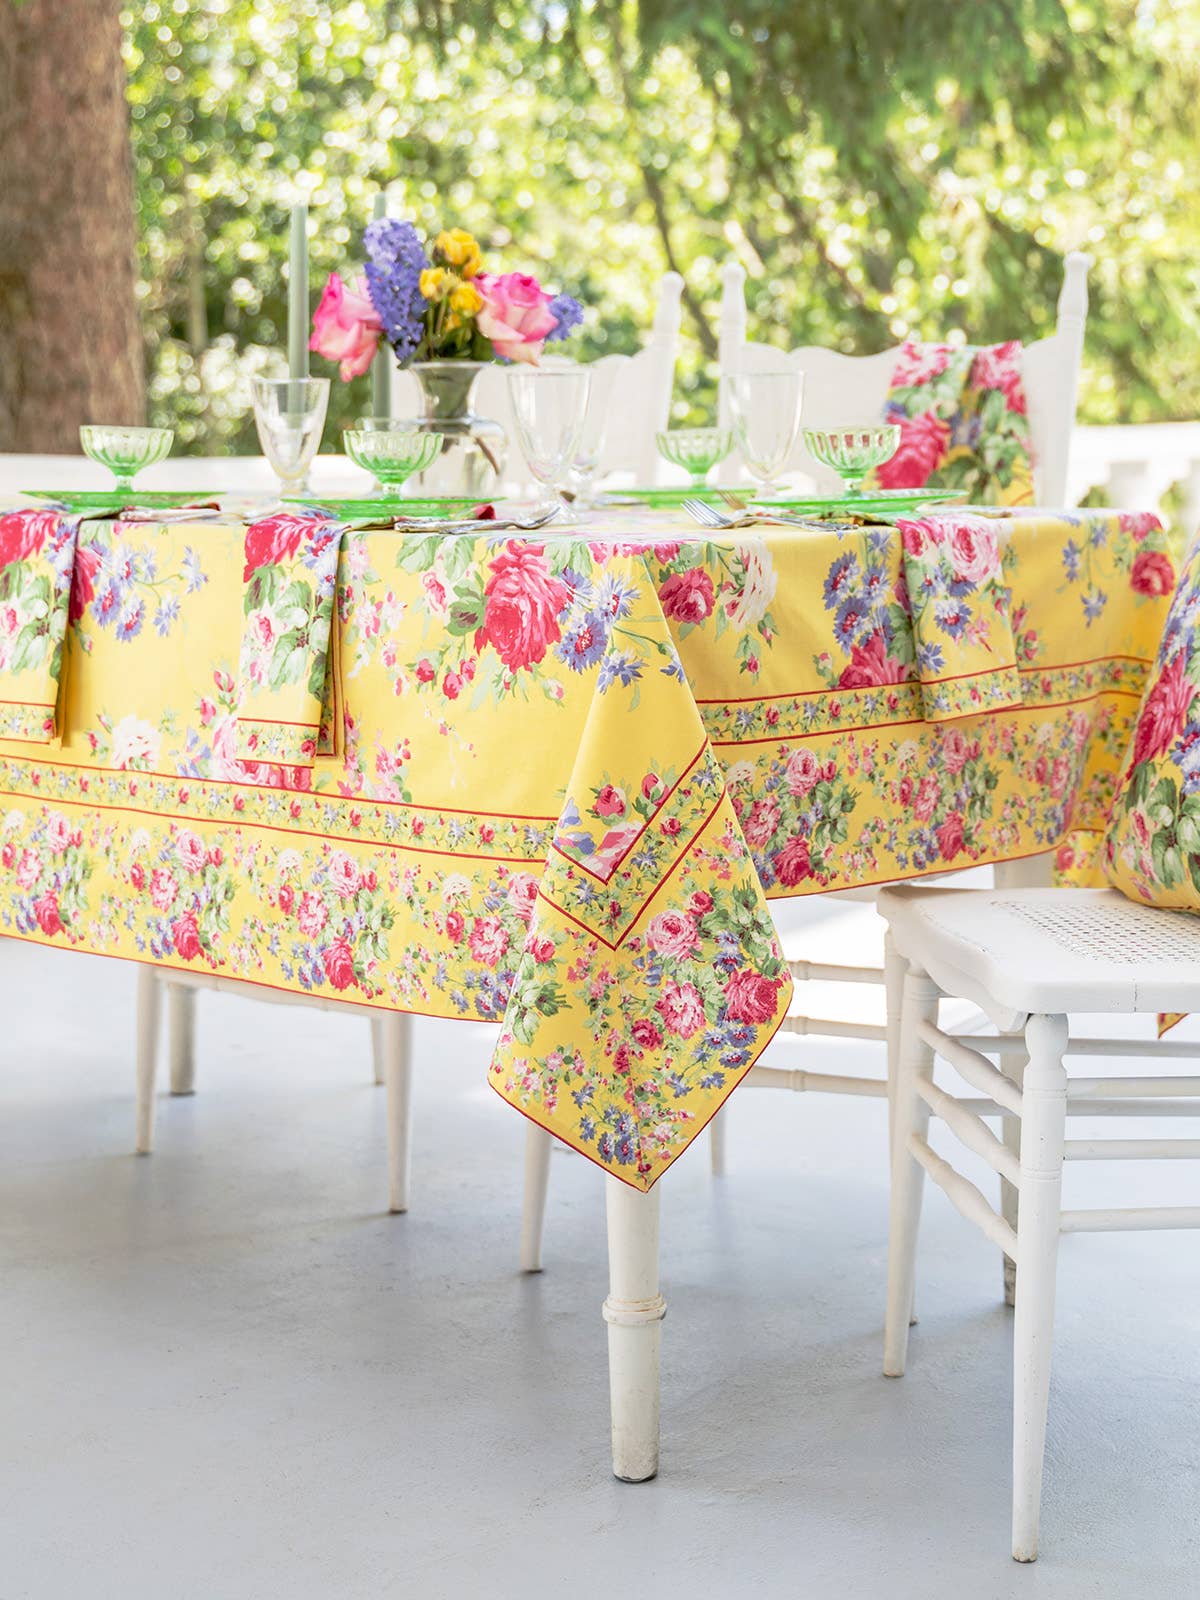 Table is setup using Cottage Rose Tablecloth by April Cornell.